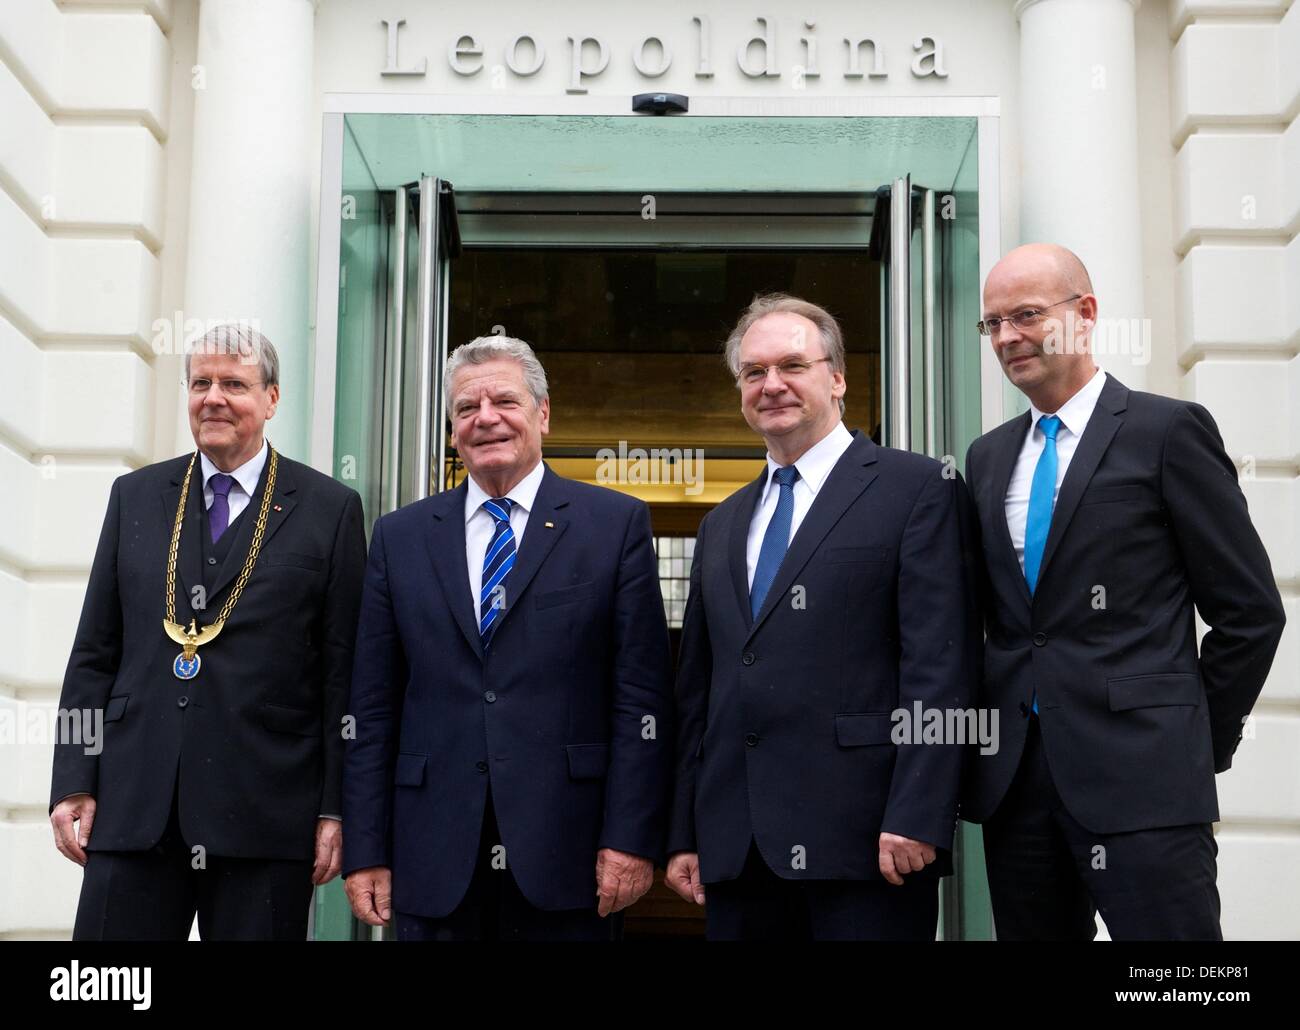 German President Joachim Gauck (2-L) stands next to President of the Leopoldina Joerg Hacker (L), Premier of Saxony-Anhalt Reiner Haselhoff (2-R) and Mayor of Halle Bernd Wiegand outside of the Leopoldina in Halle, Germany, 20 September 2013. The politicians were invited to the annual conference of the German Academy of Sciences Leopoldina. The Leopoldina has 1,400 elected members including 30 Nobel Prize winners. Photo: PETER ENDIG Stock Photo